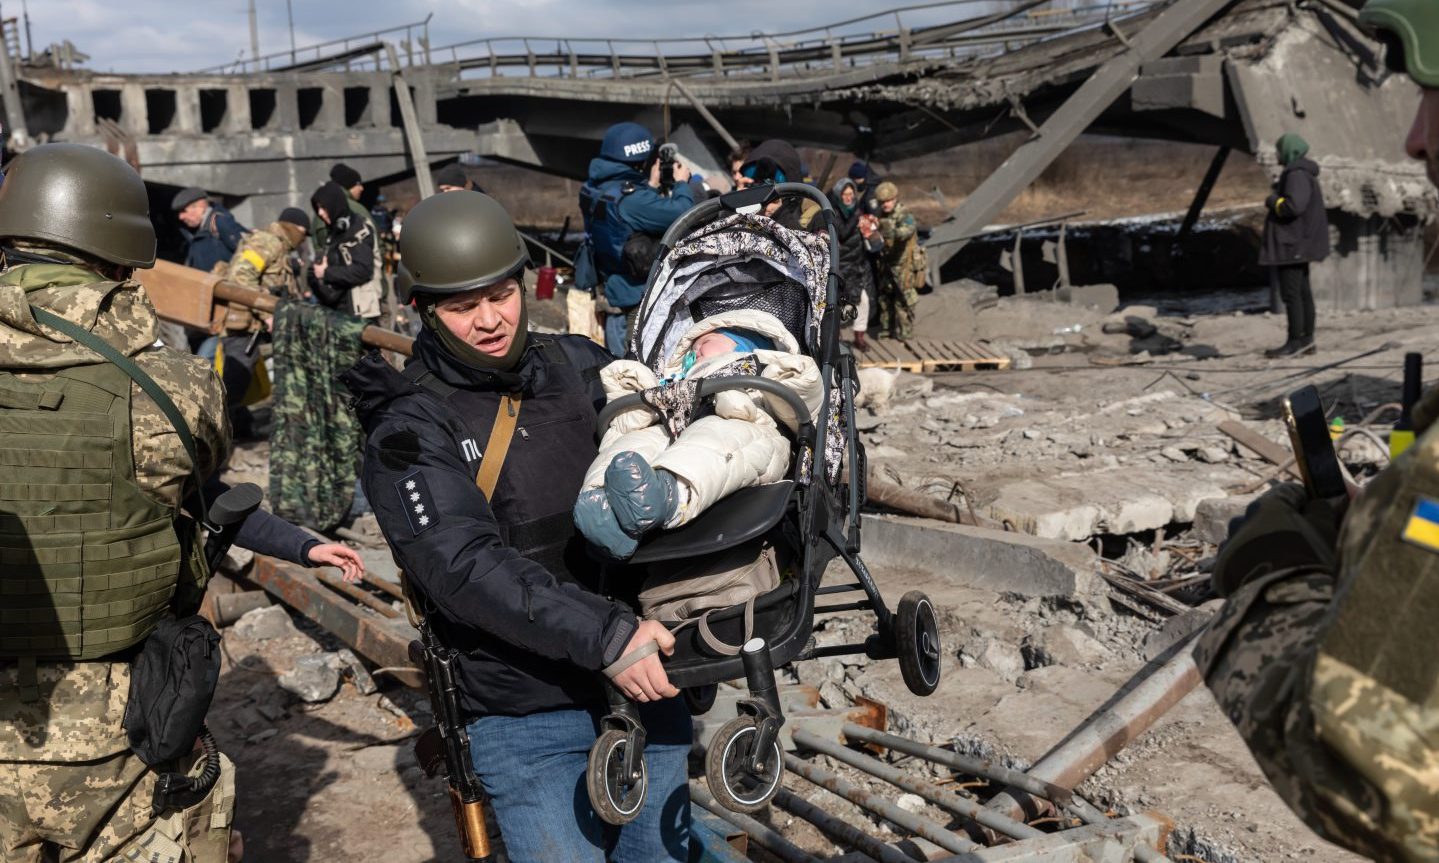 A baby is carried to safety from the rubble in Irpin in Ukraine